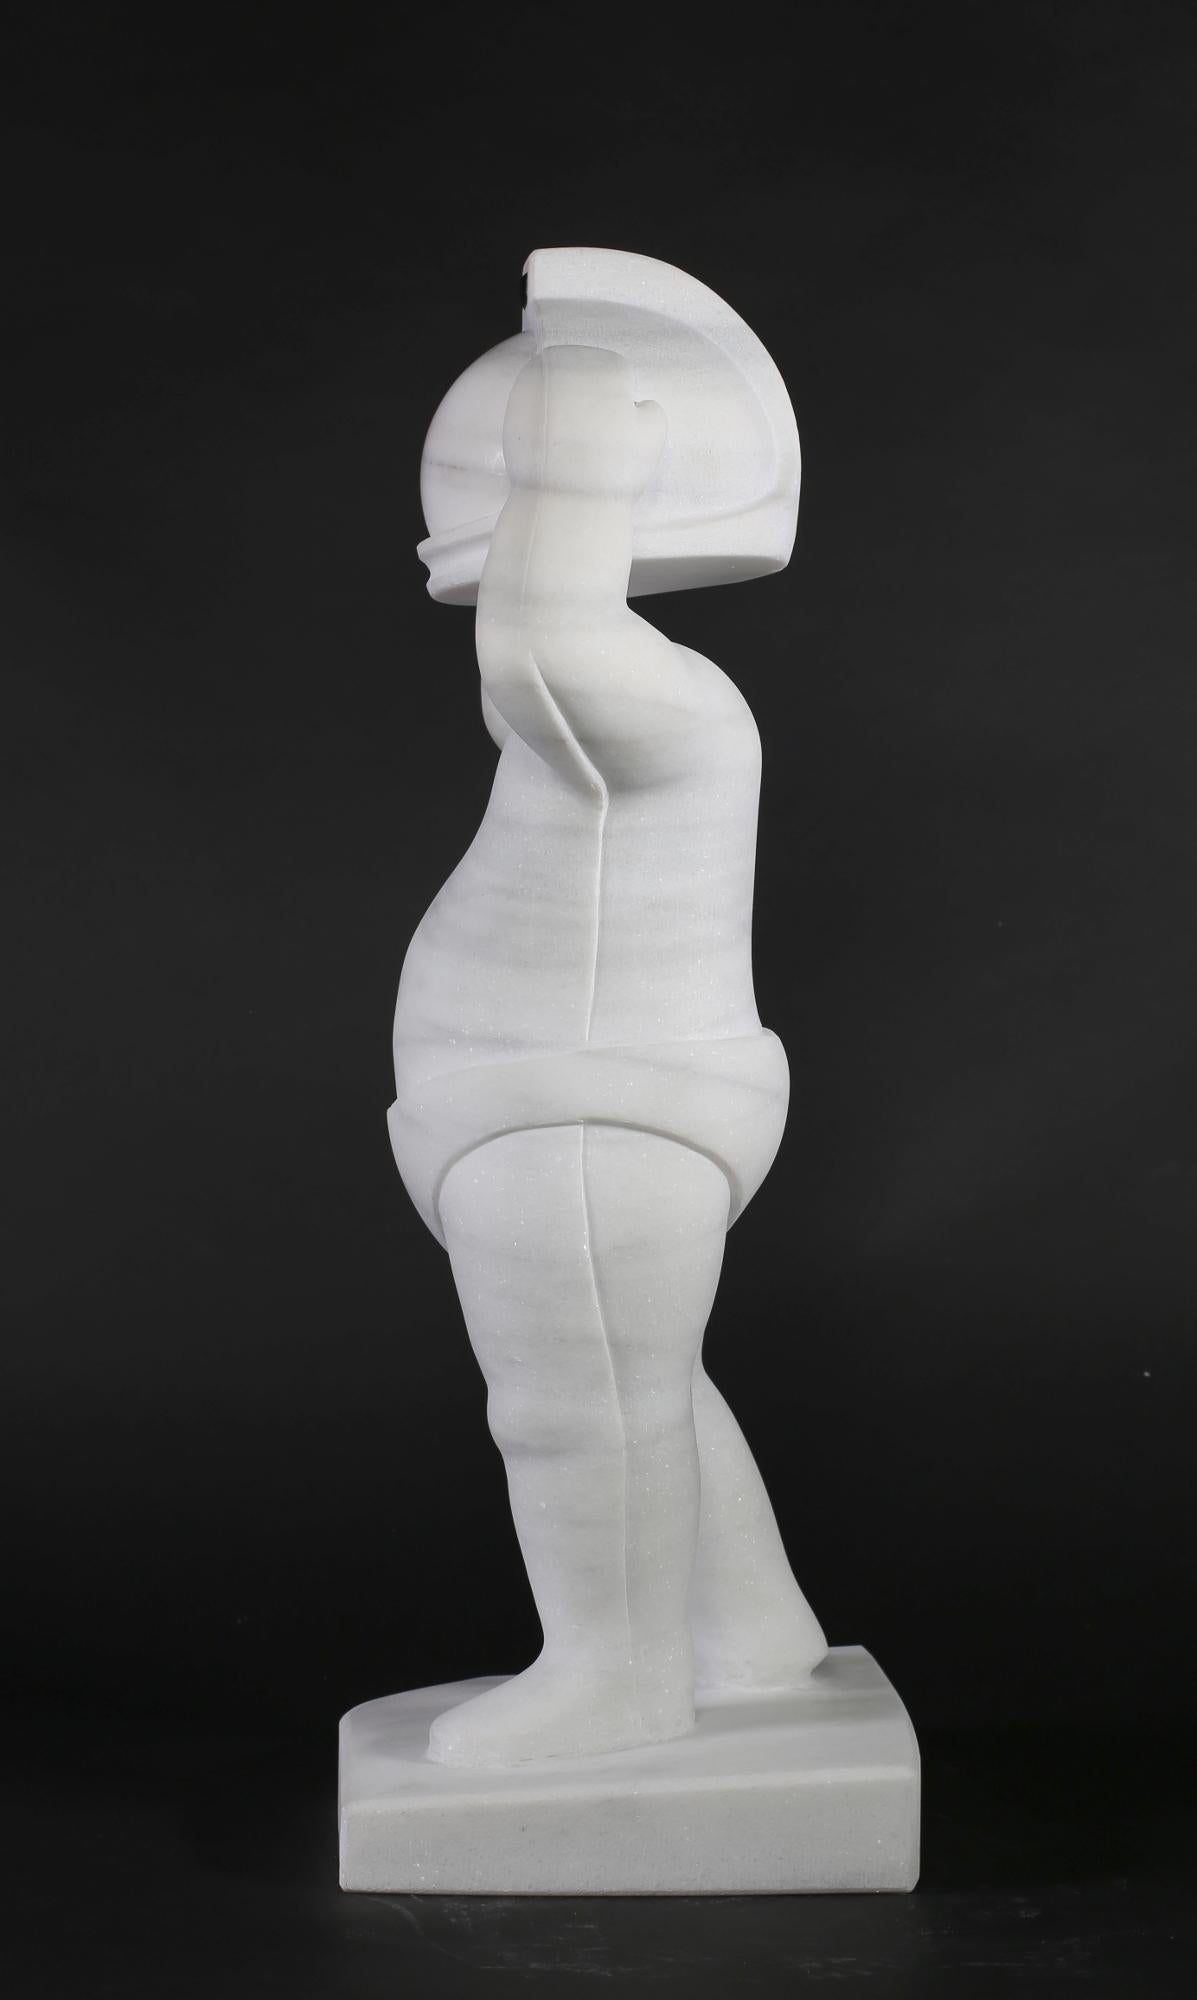 New Age Explorers. Nº1 Without Neck. Figurative Marble Sculpture by Mario Romero 1